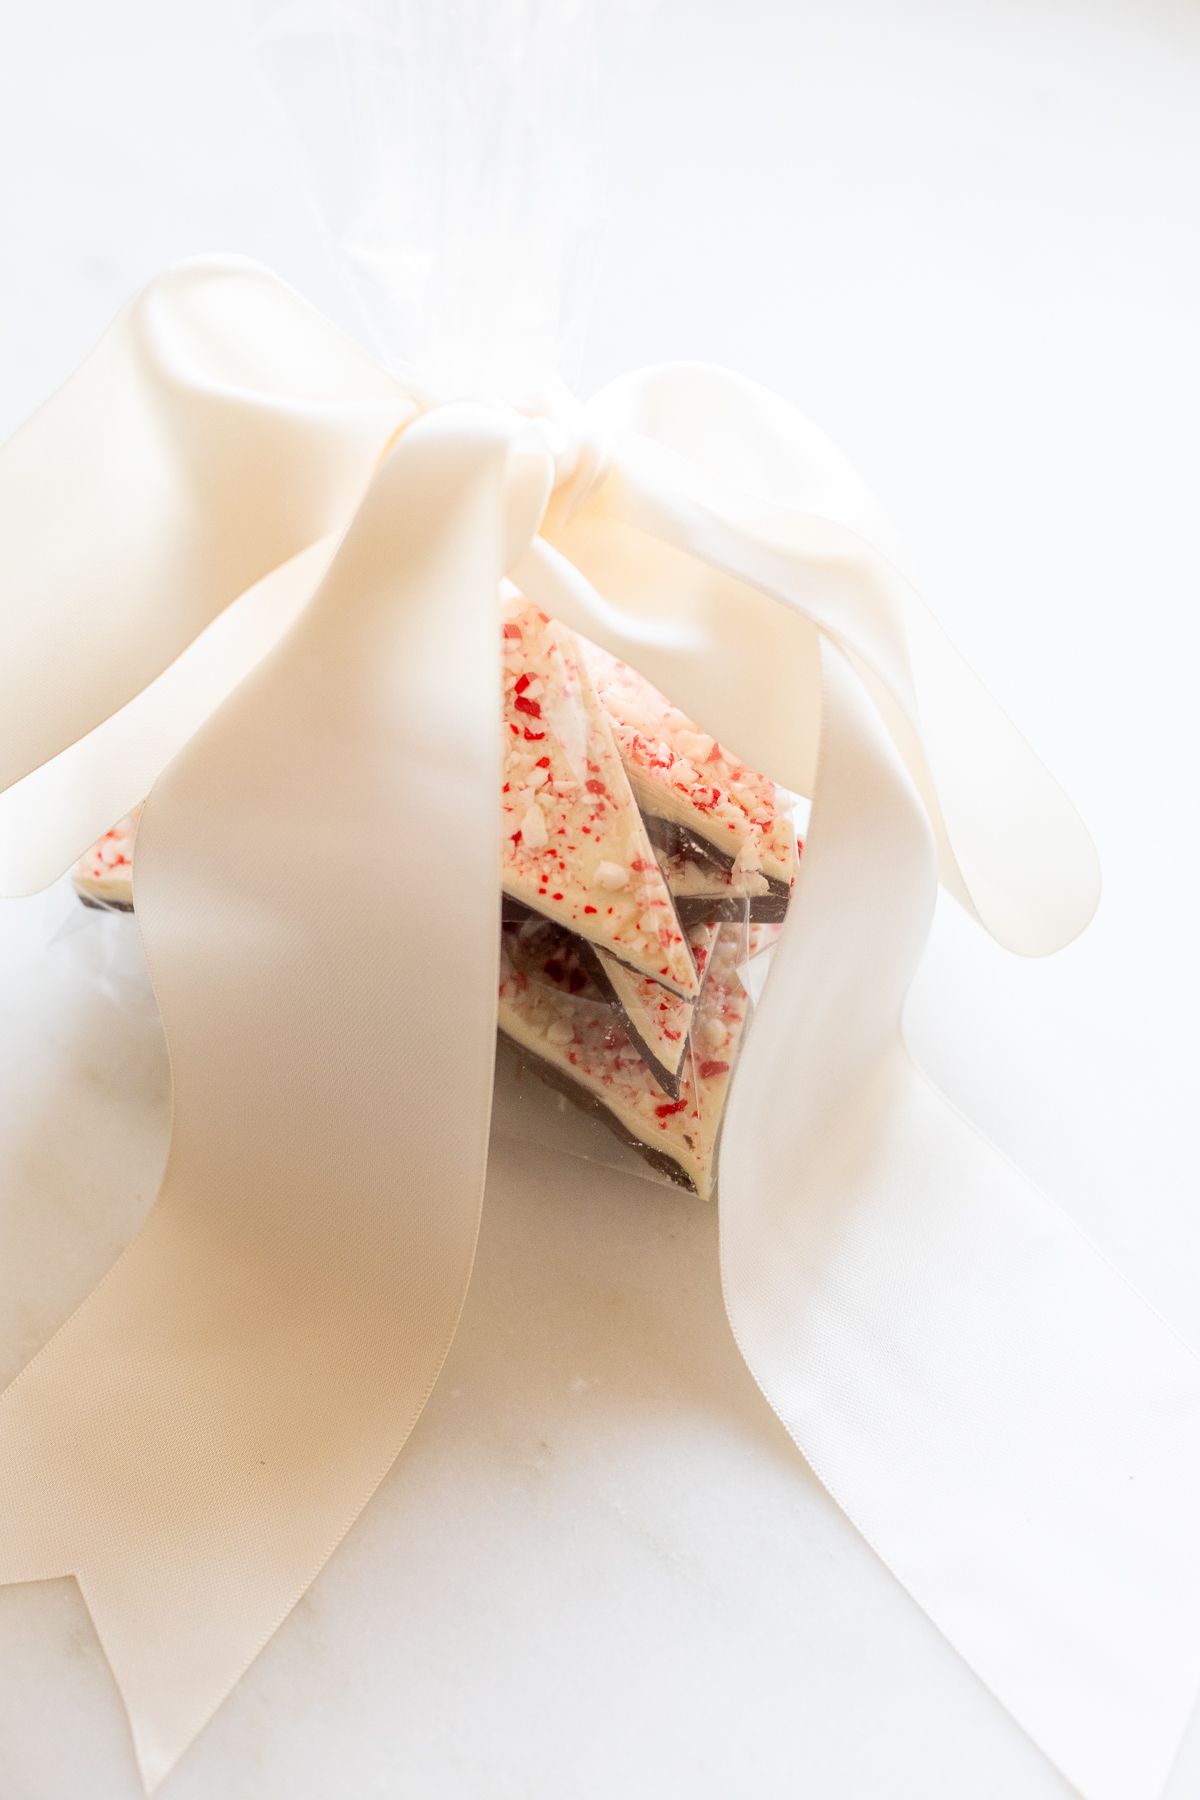 Peppermint bark wrapped in a cellophane bag and tied with a bow for a holiday gift.